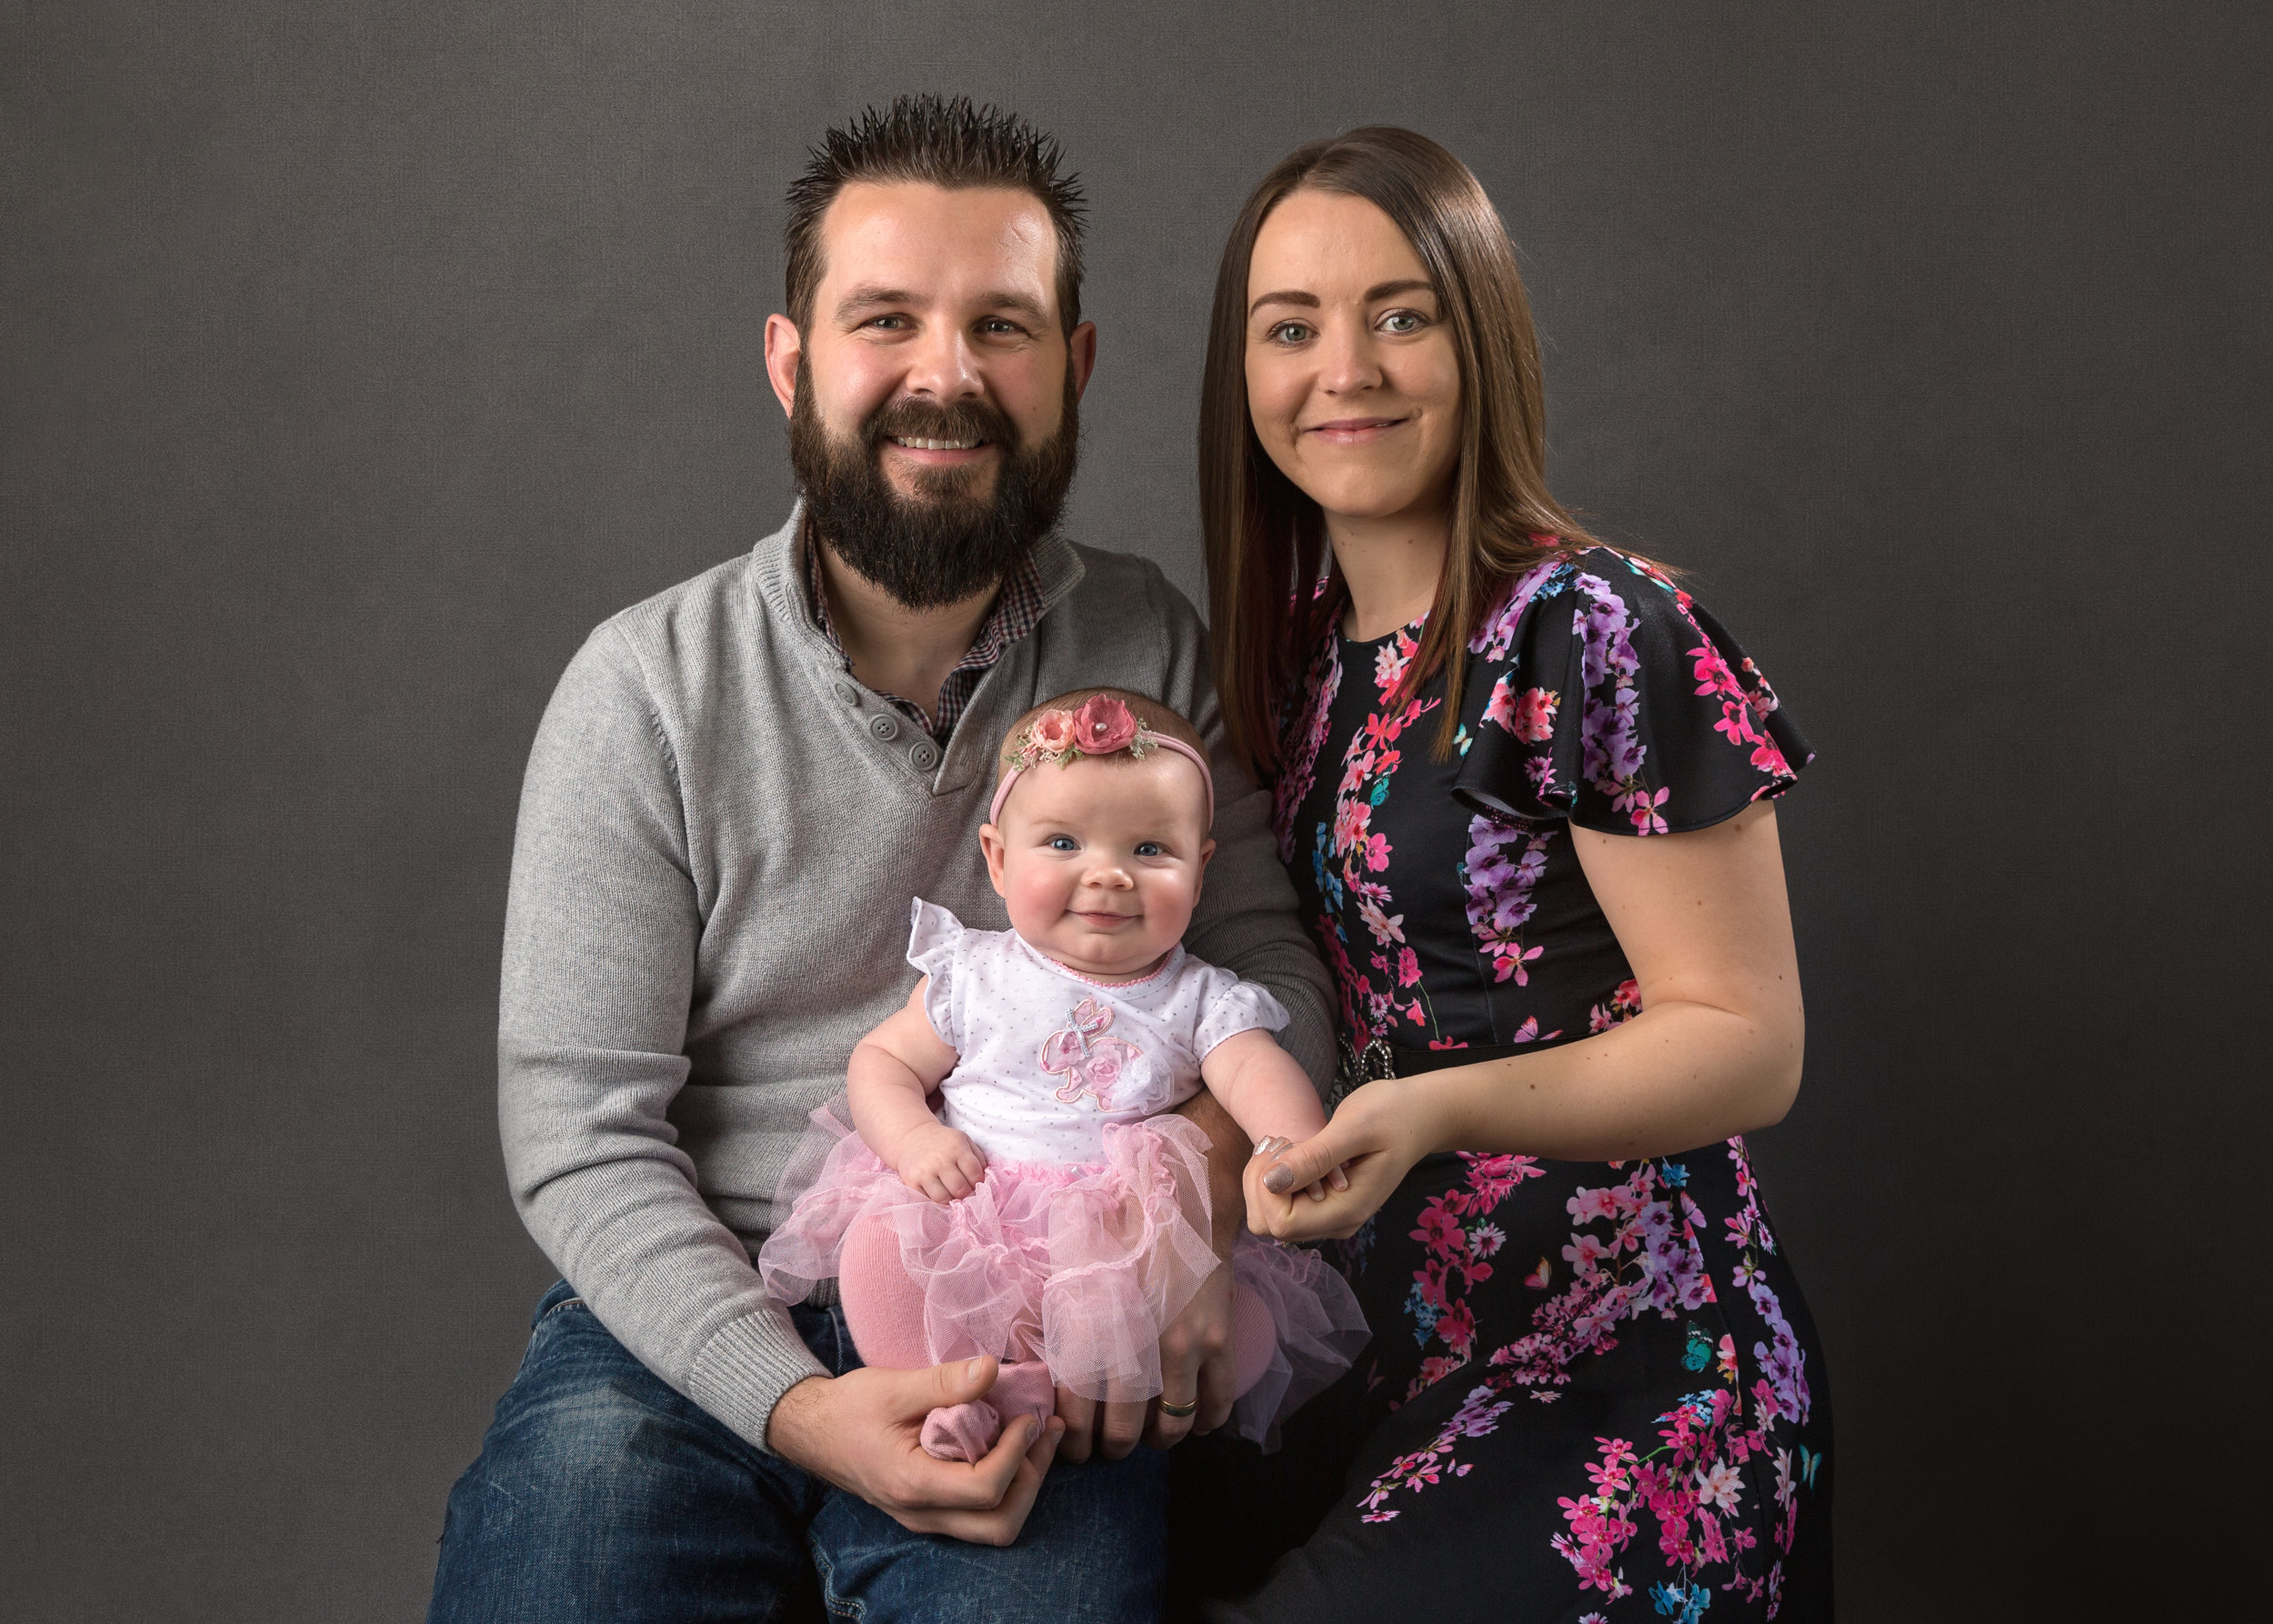 Family studio portraits, Caerphilly, near Cardiff, South Wales